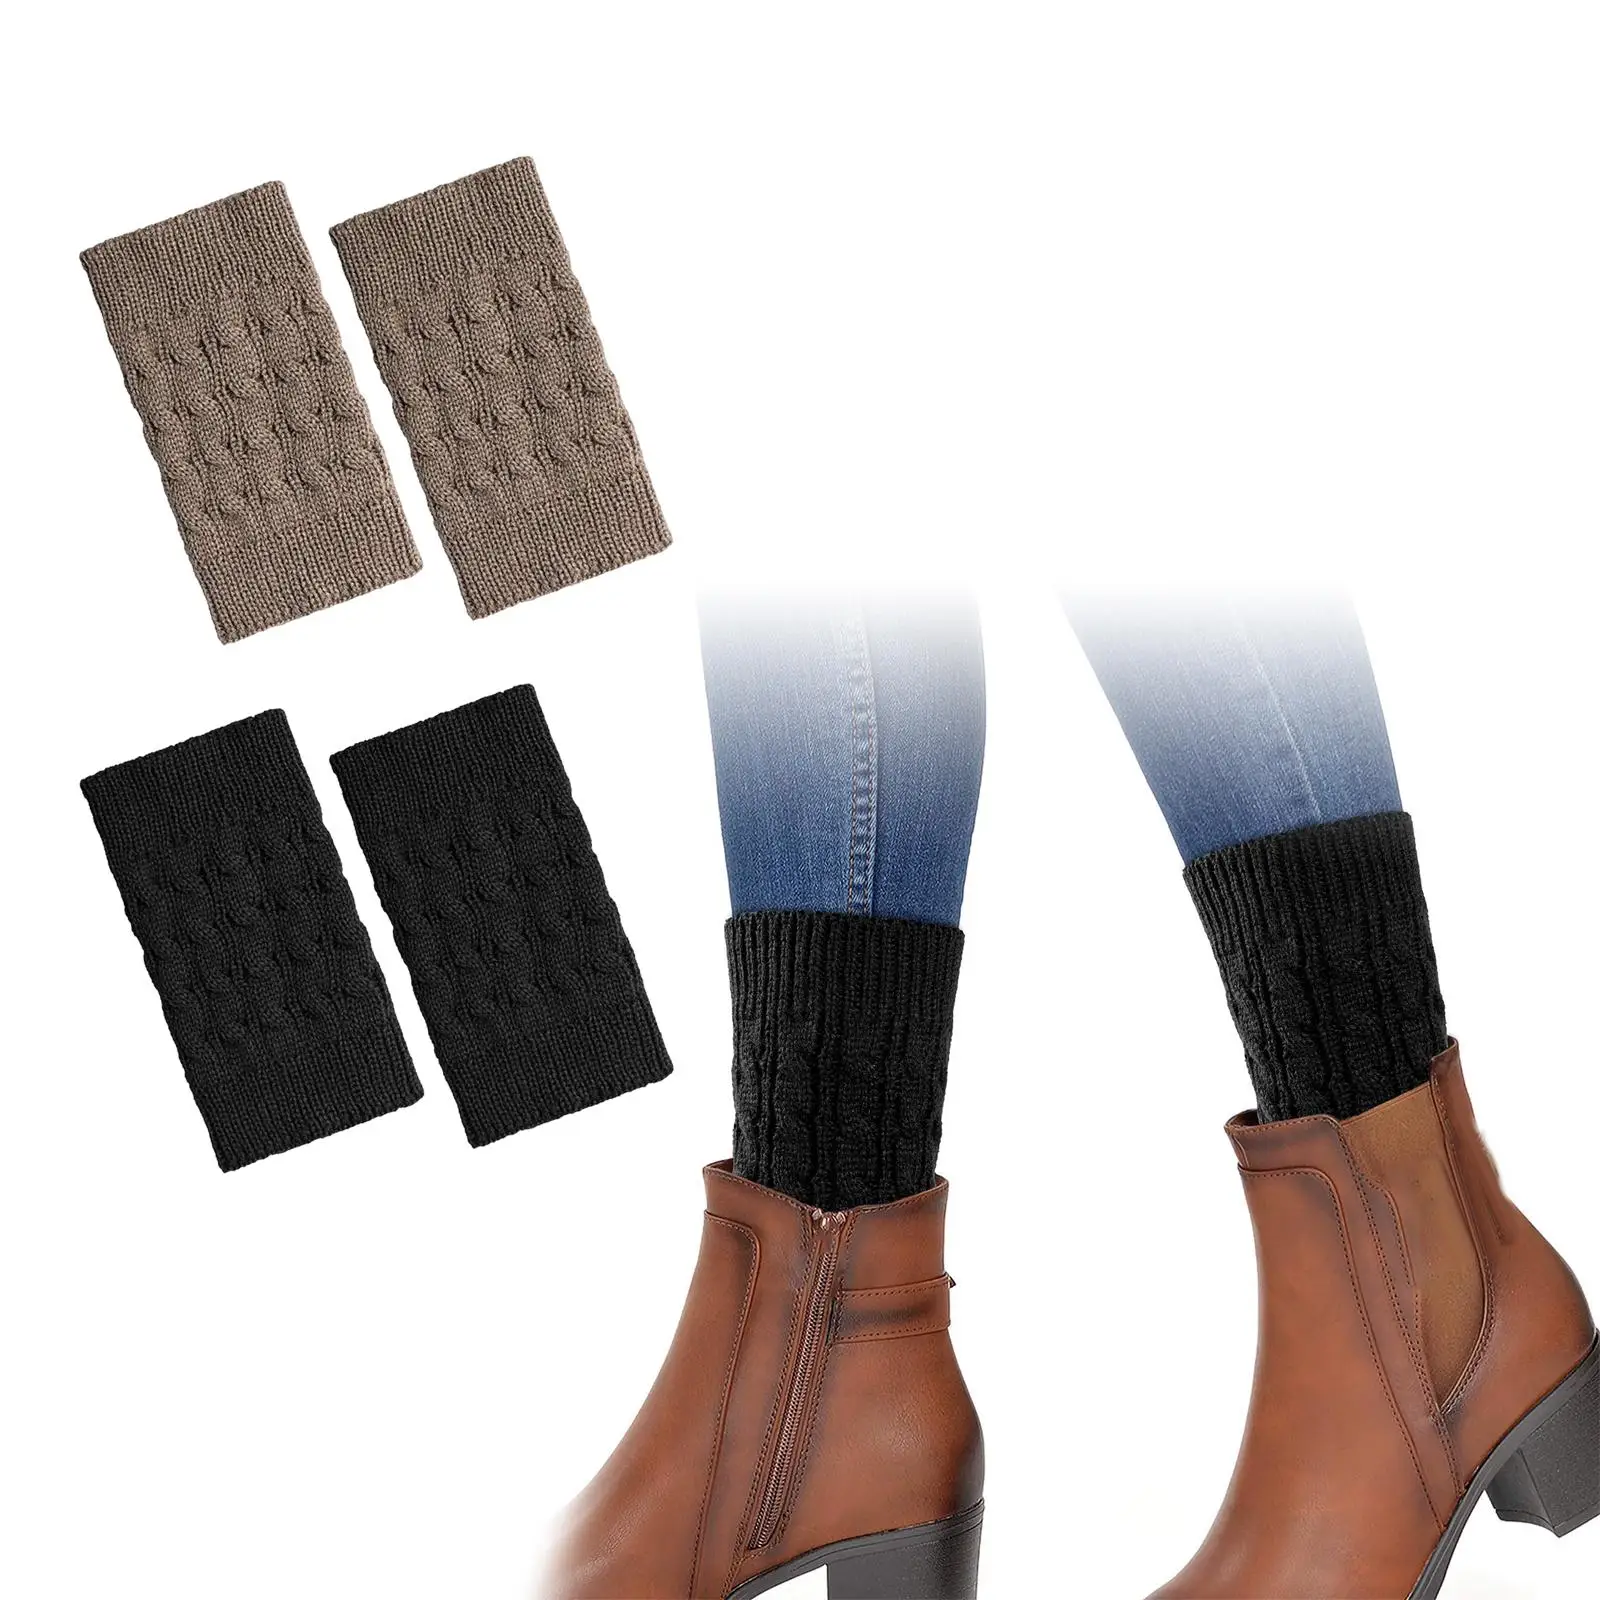 2Pairs Womens Boot Cuffs, Cable Knit Boot Toppers, Winter Boot Socks, Fashion Casual Leg Warmers